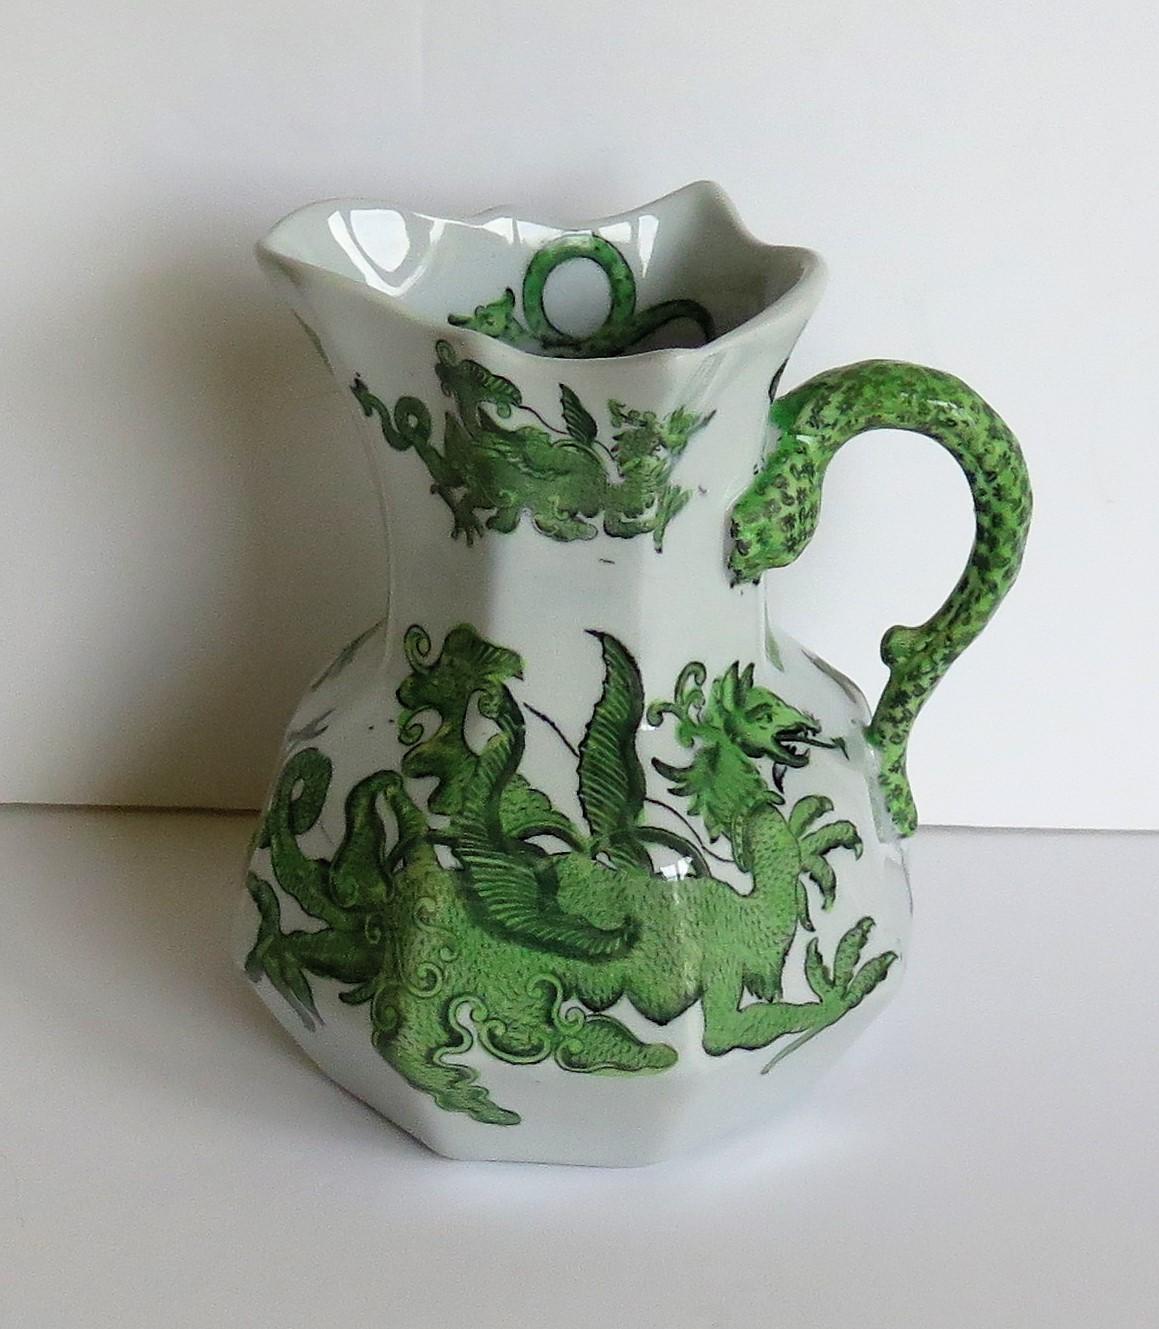 Mason's Ironstone Jug or Pitcher in Green Chinese Dragon Pattern, 19th Century 2